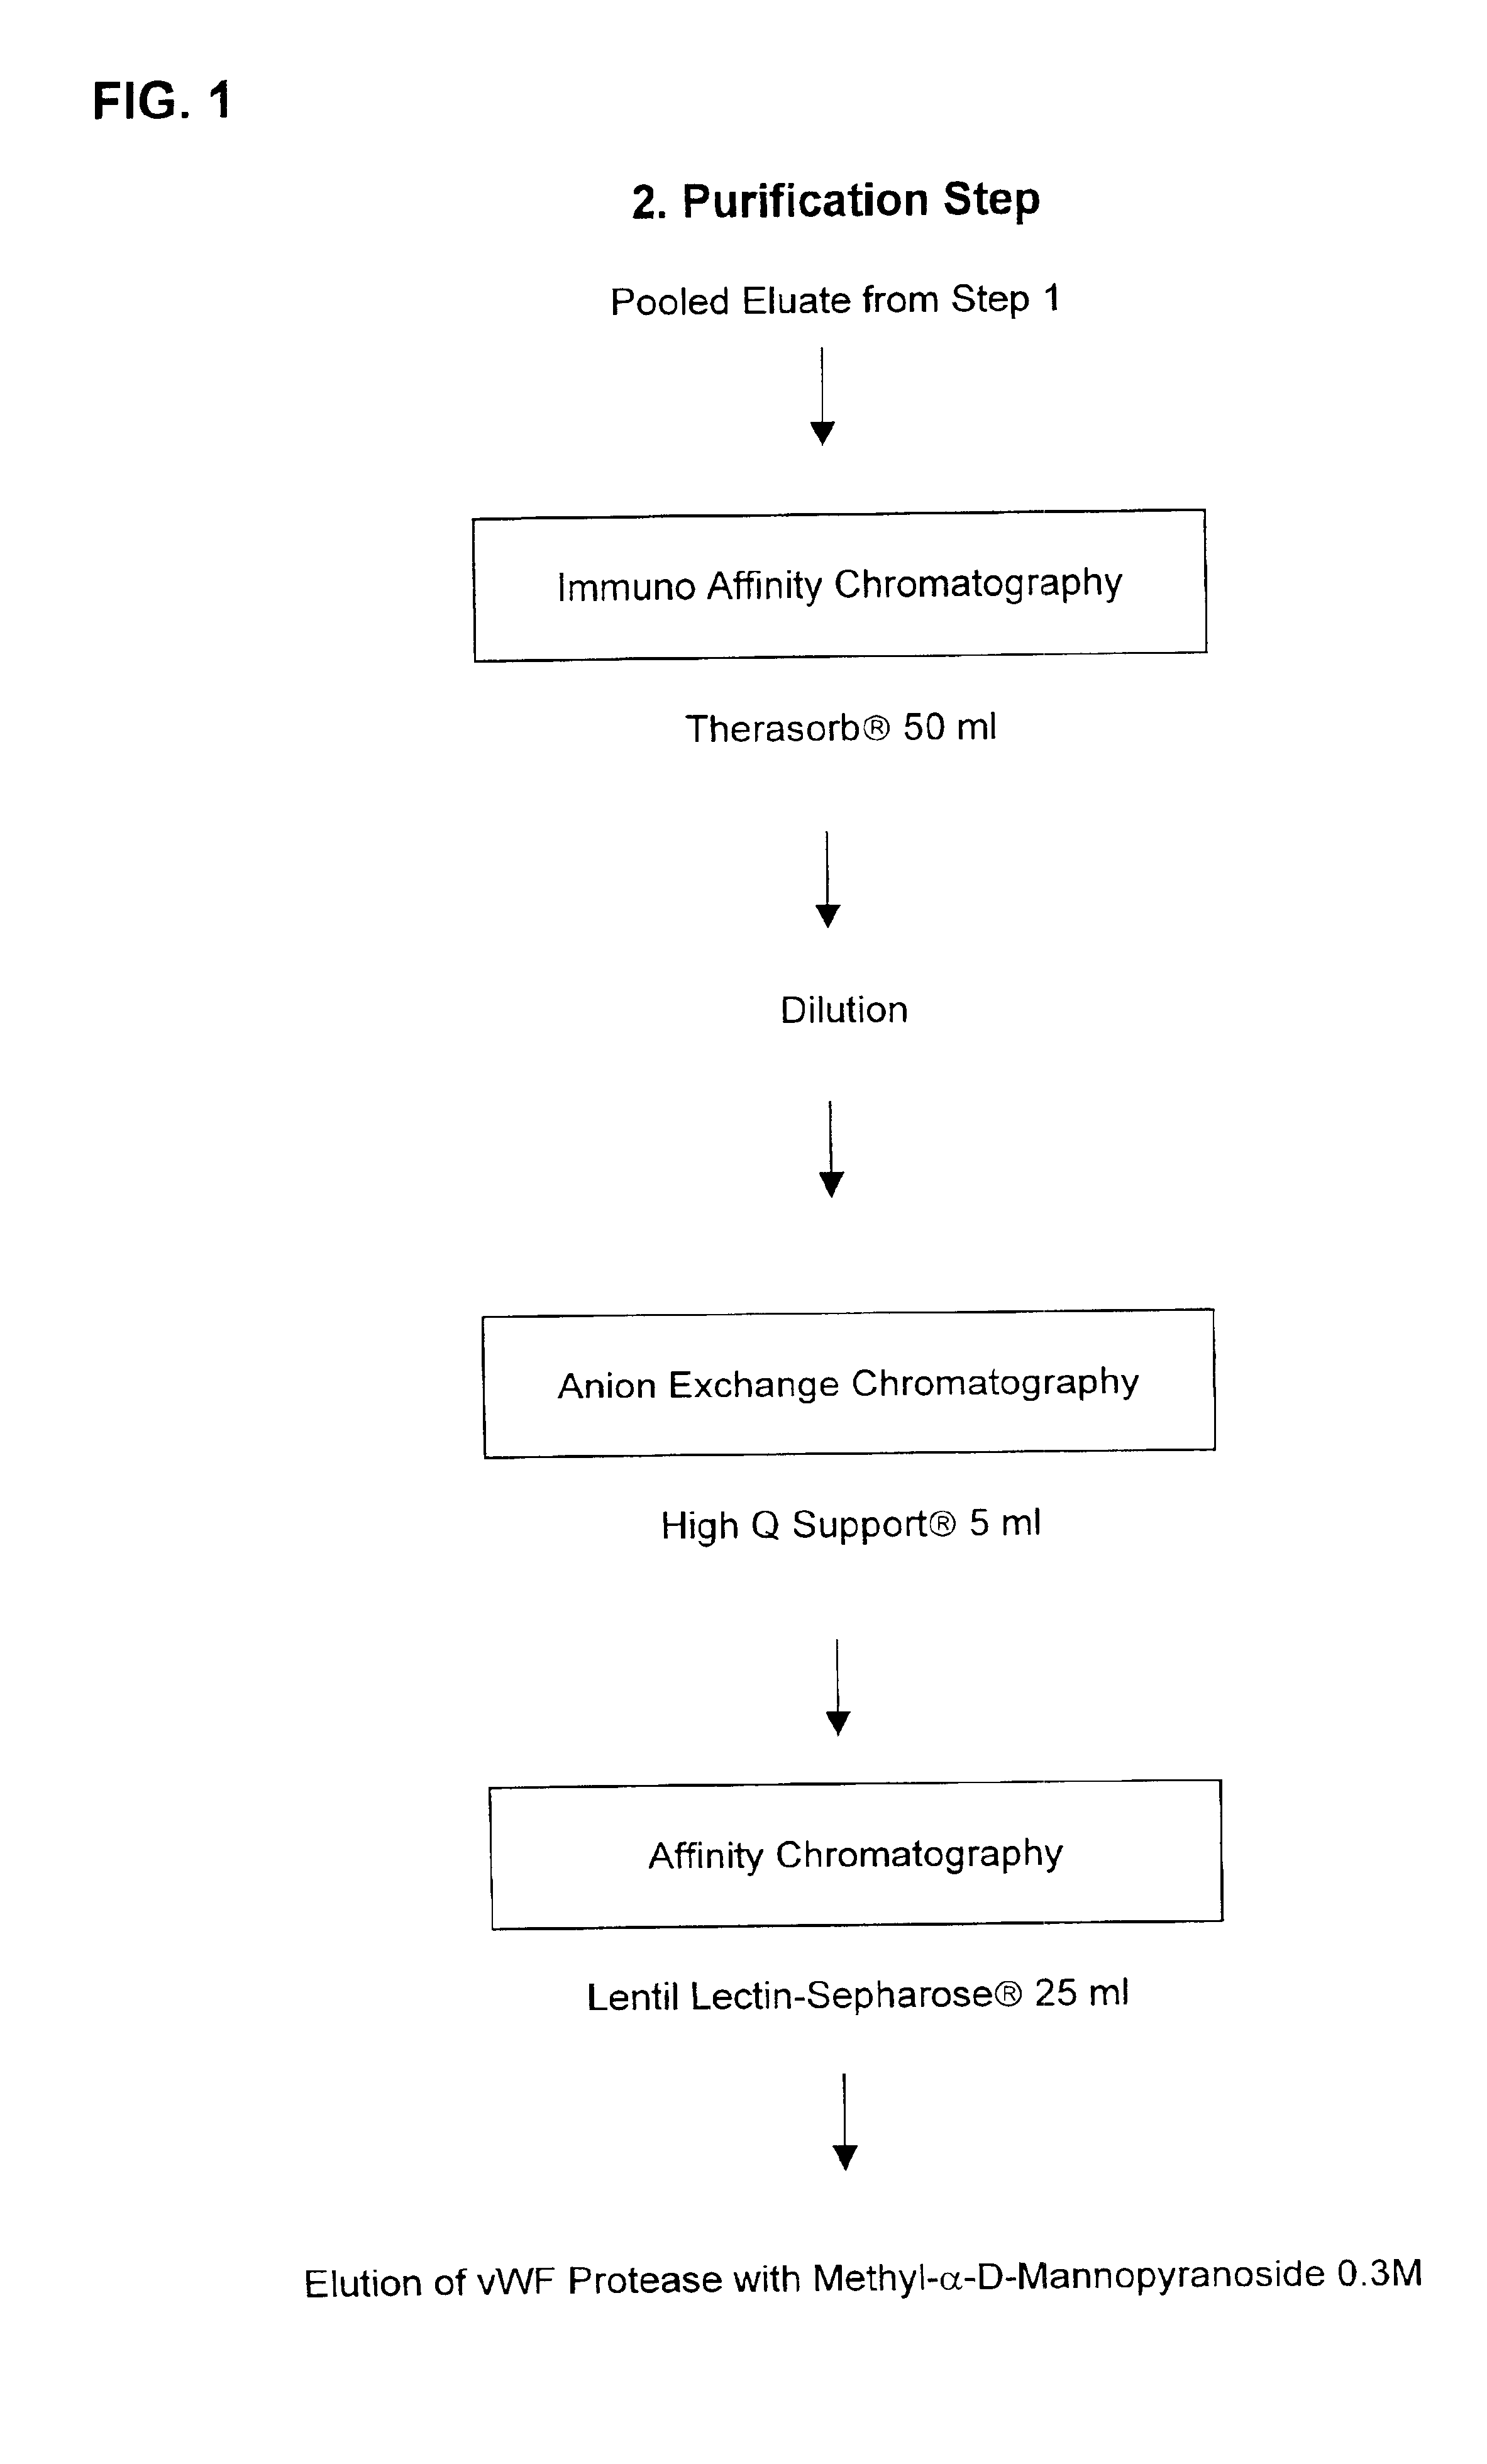 Composition exhibiting a von willebrand factor (vWF) protease activity comprising a polypeptide chain with the amino acid sequence AAGGILHLELLV